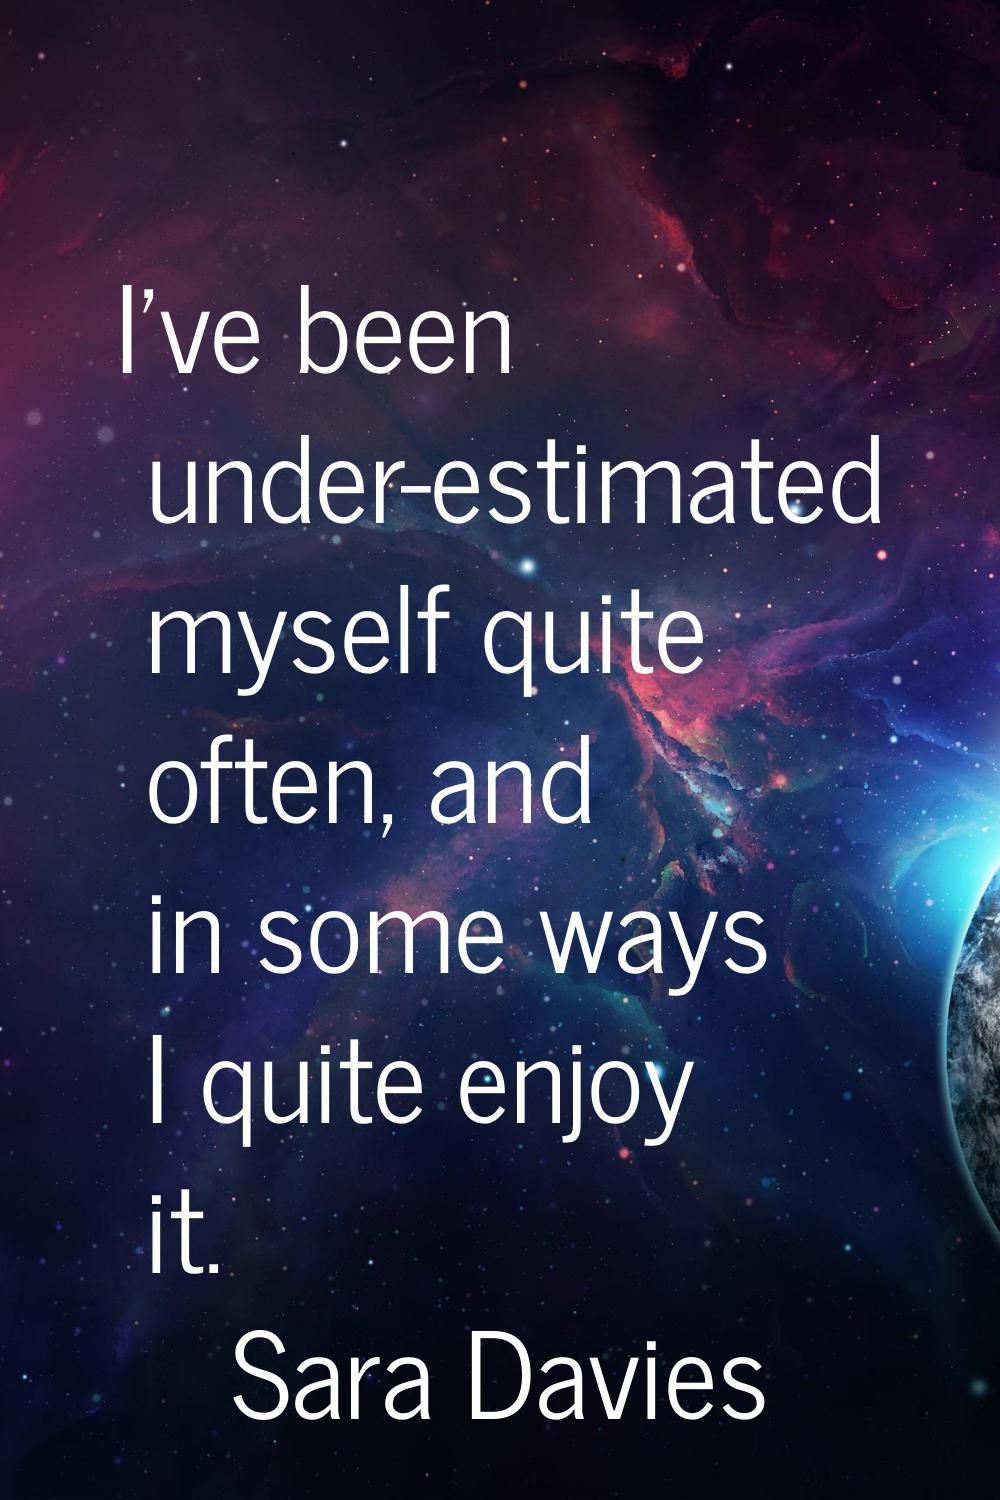 I've been under-estimated myself quite often, and in some ways I quite enjoy it.